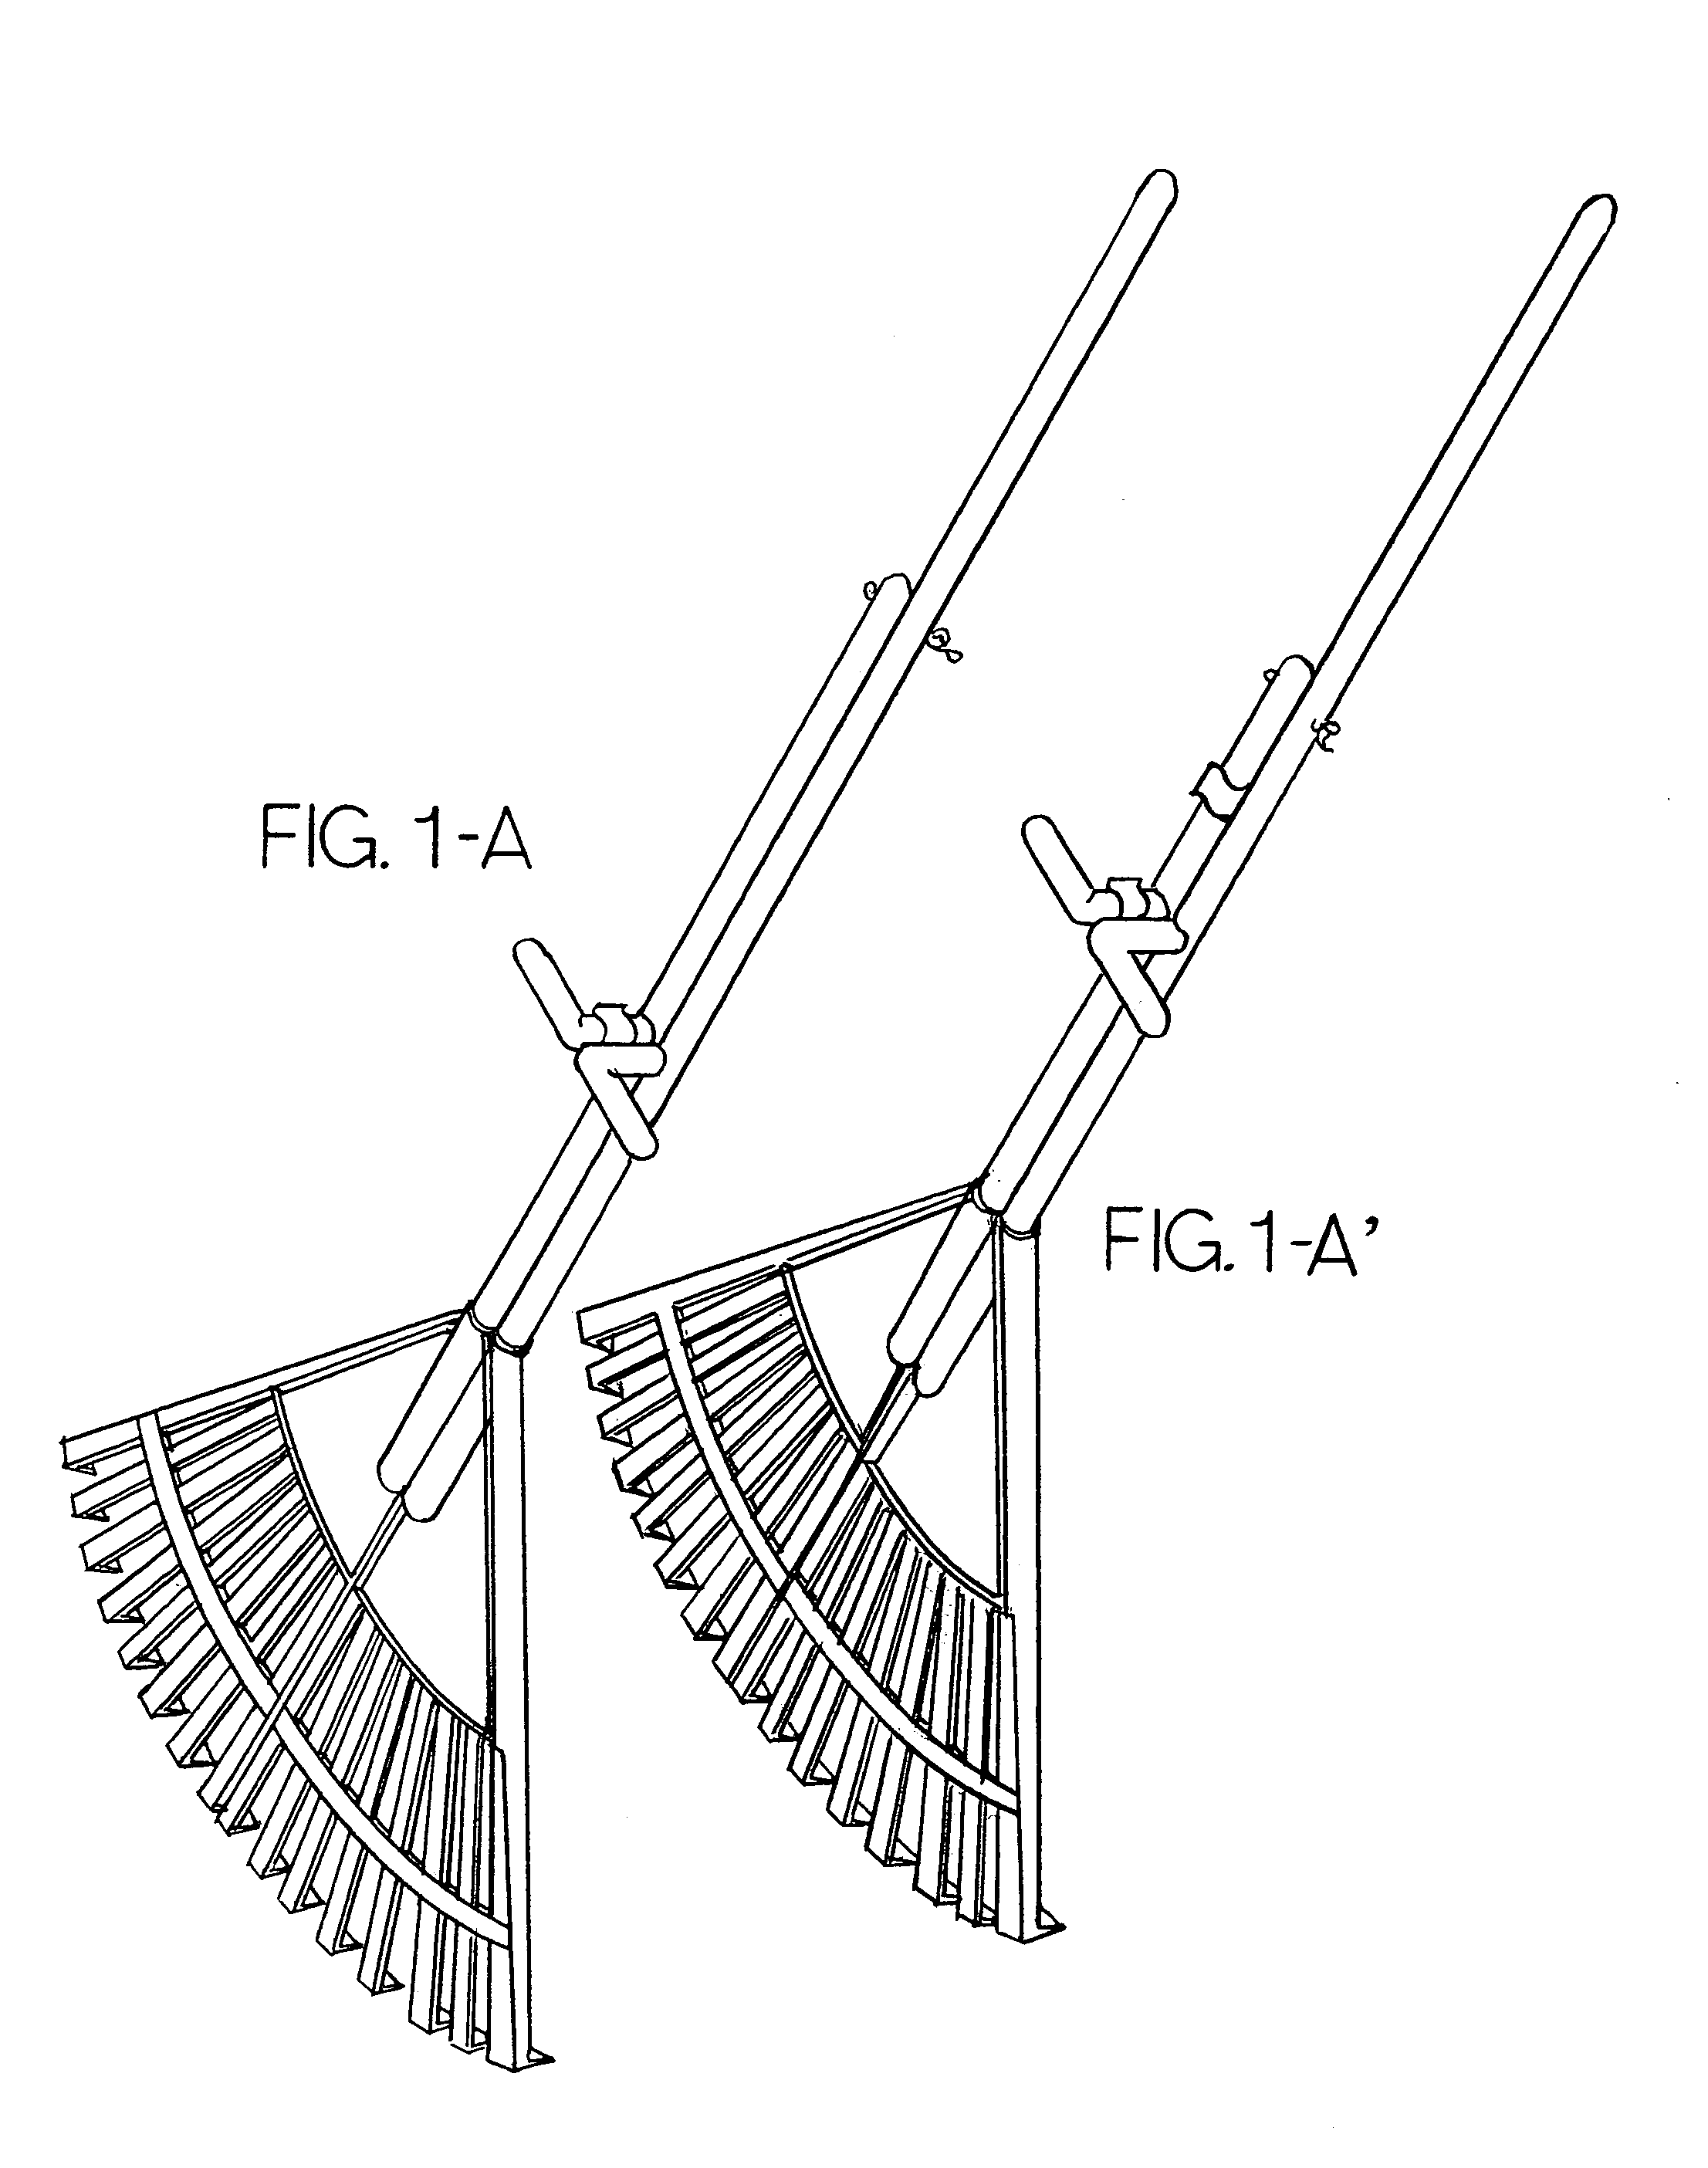 Picking rake with dual handles and dual rake heads for gathering and picking material